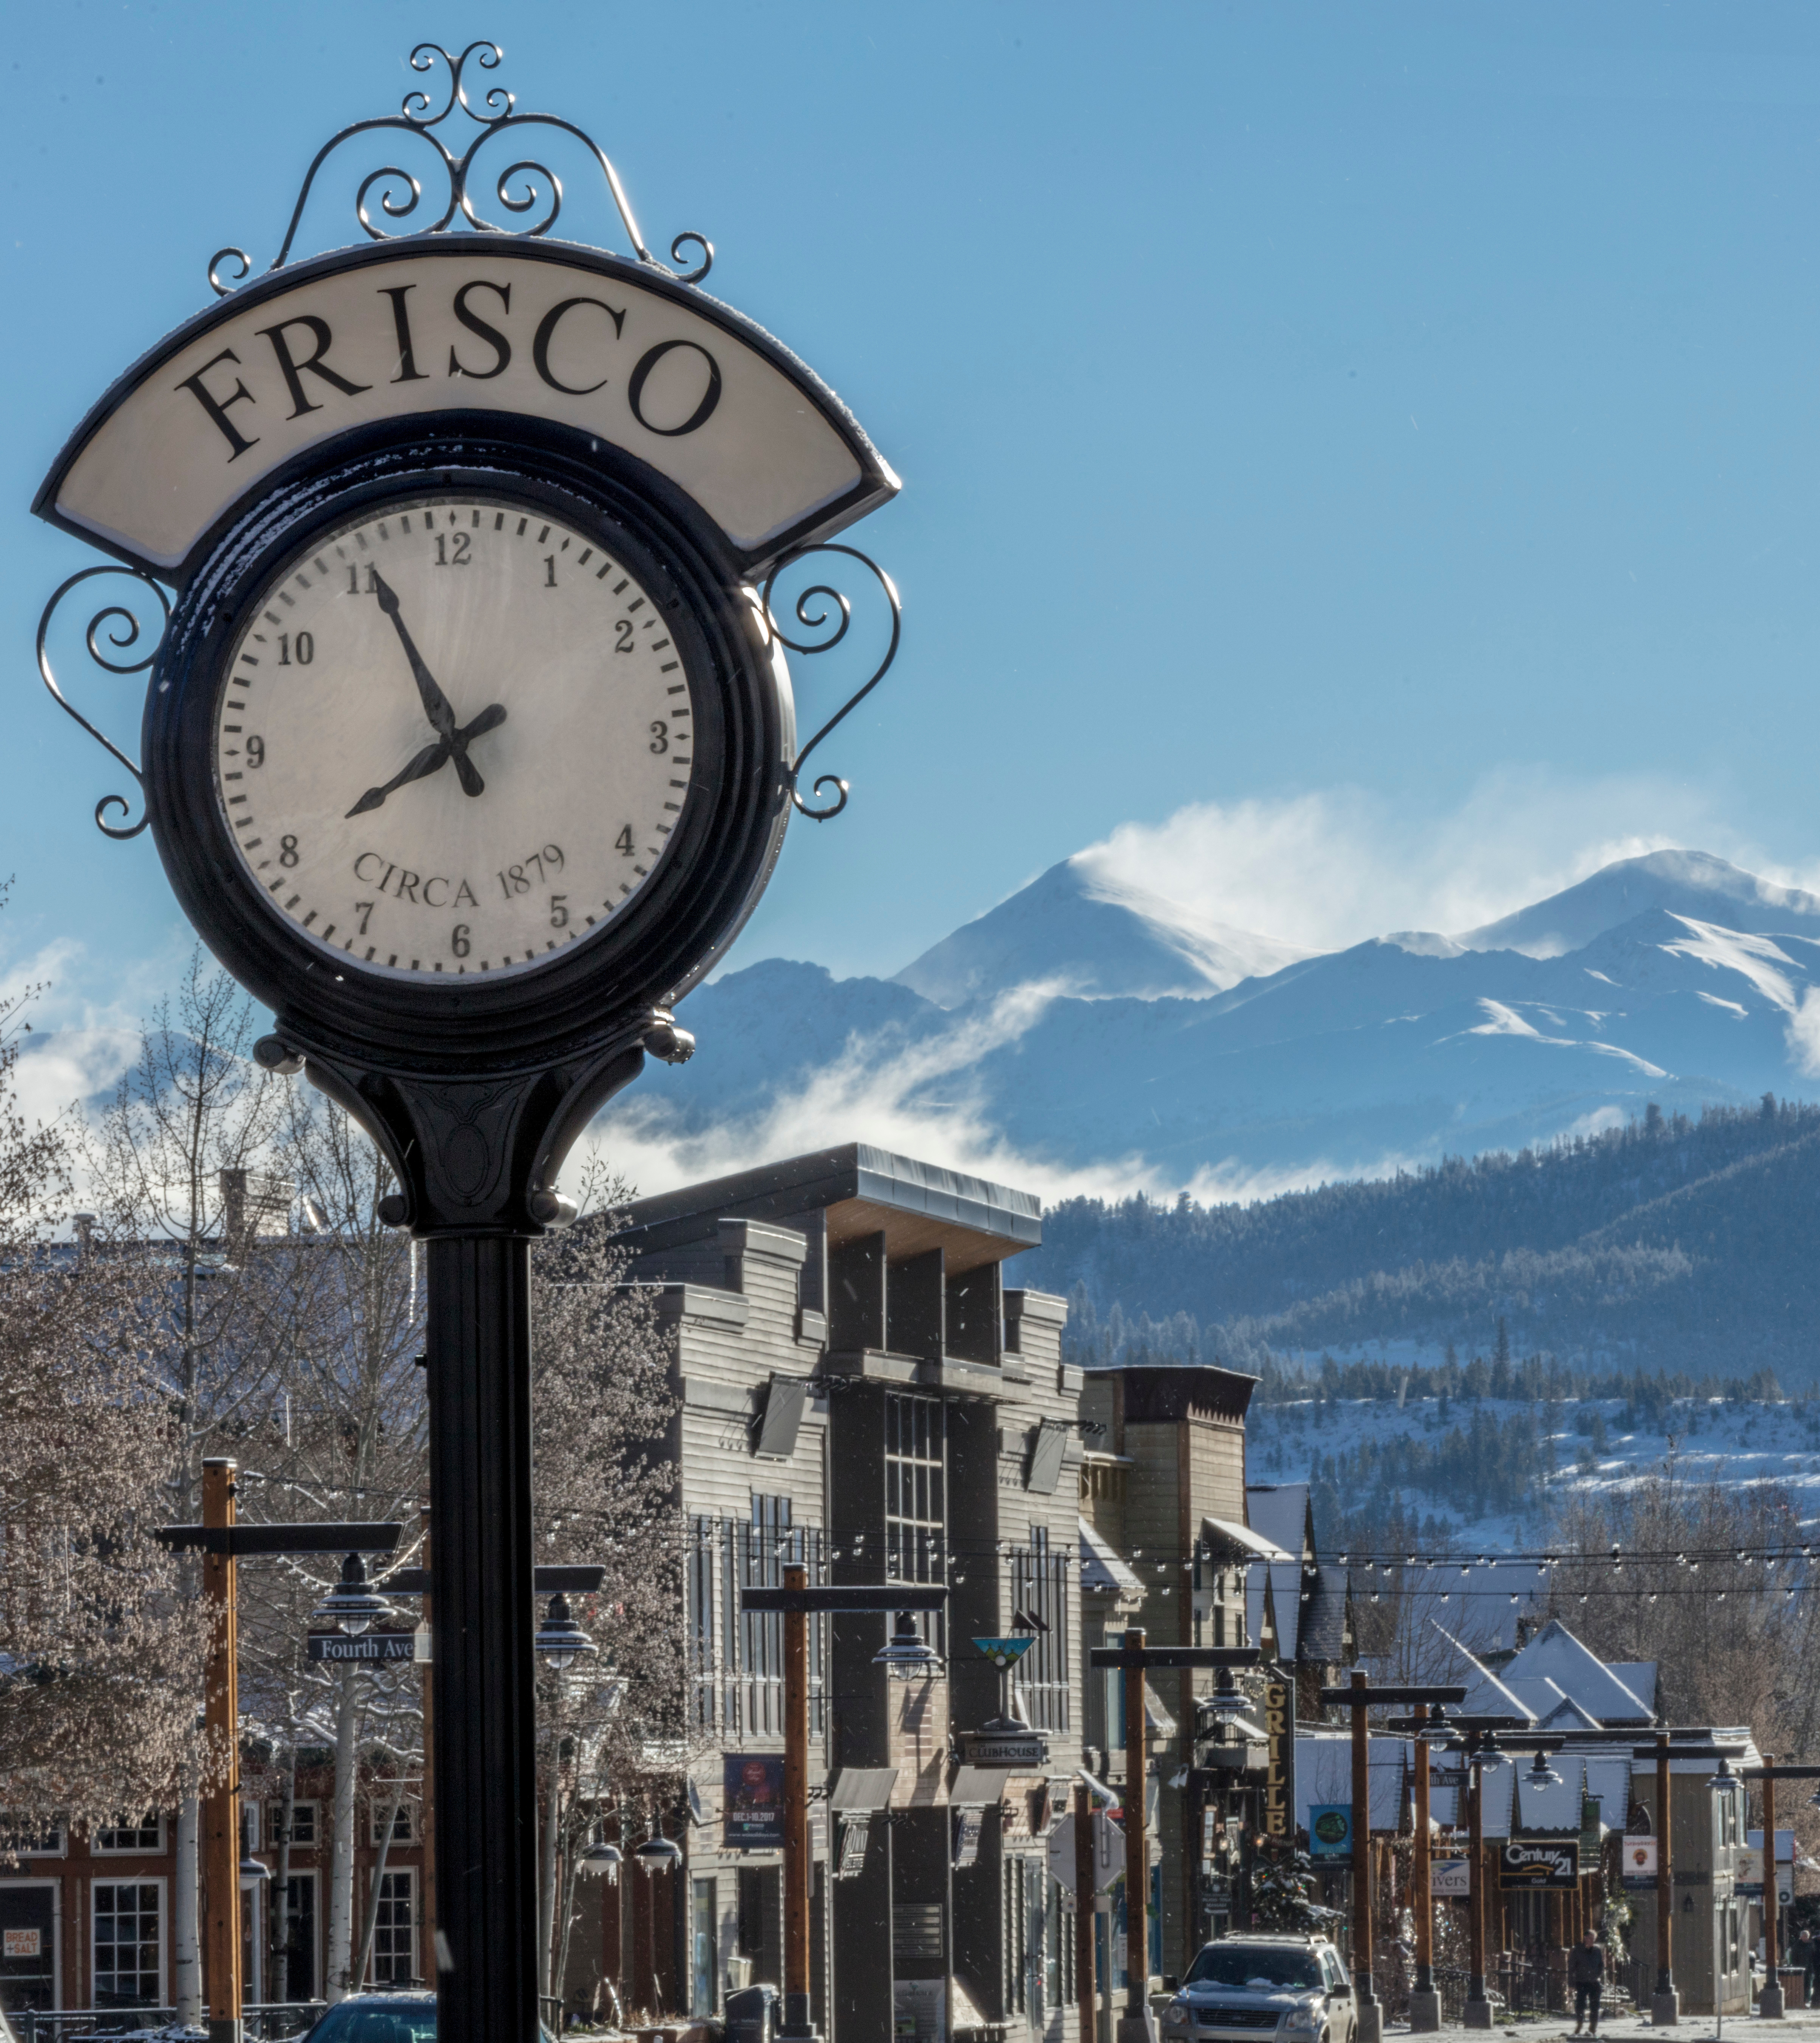 Frisco, CO | Photo Credit: Todd Powell